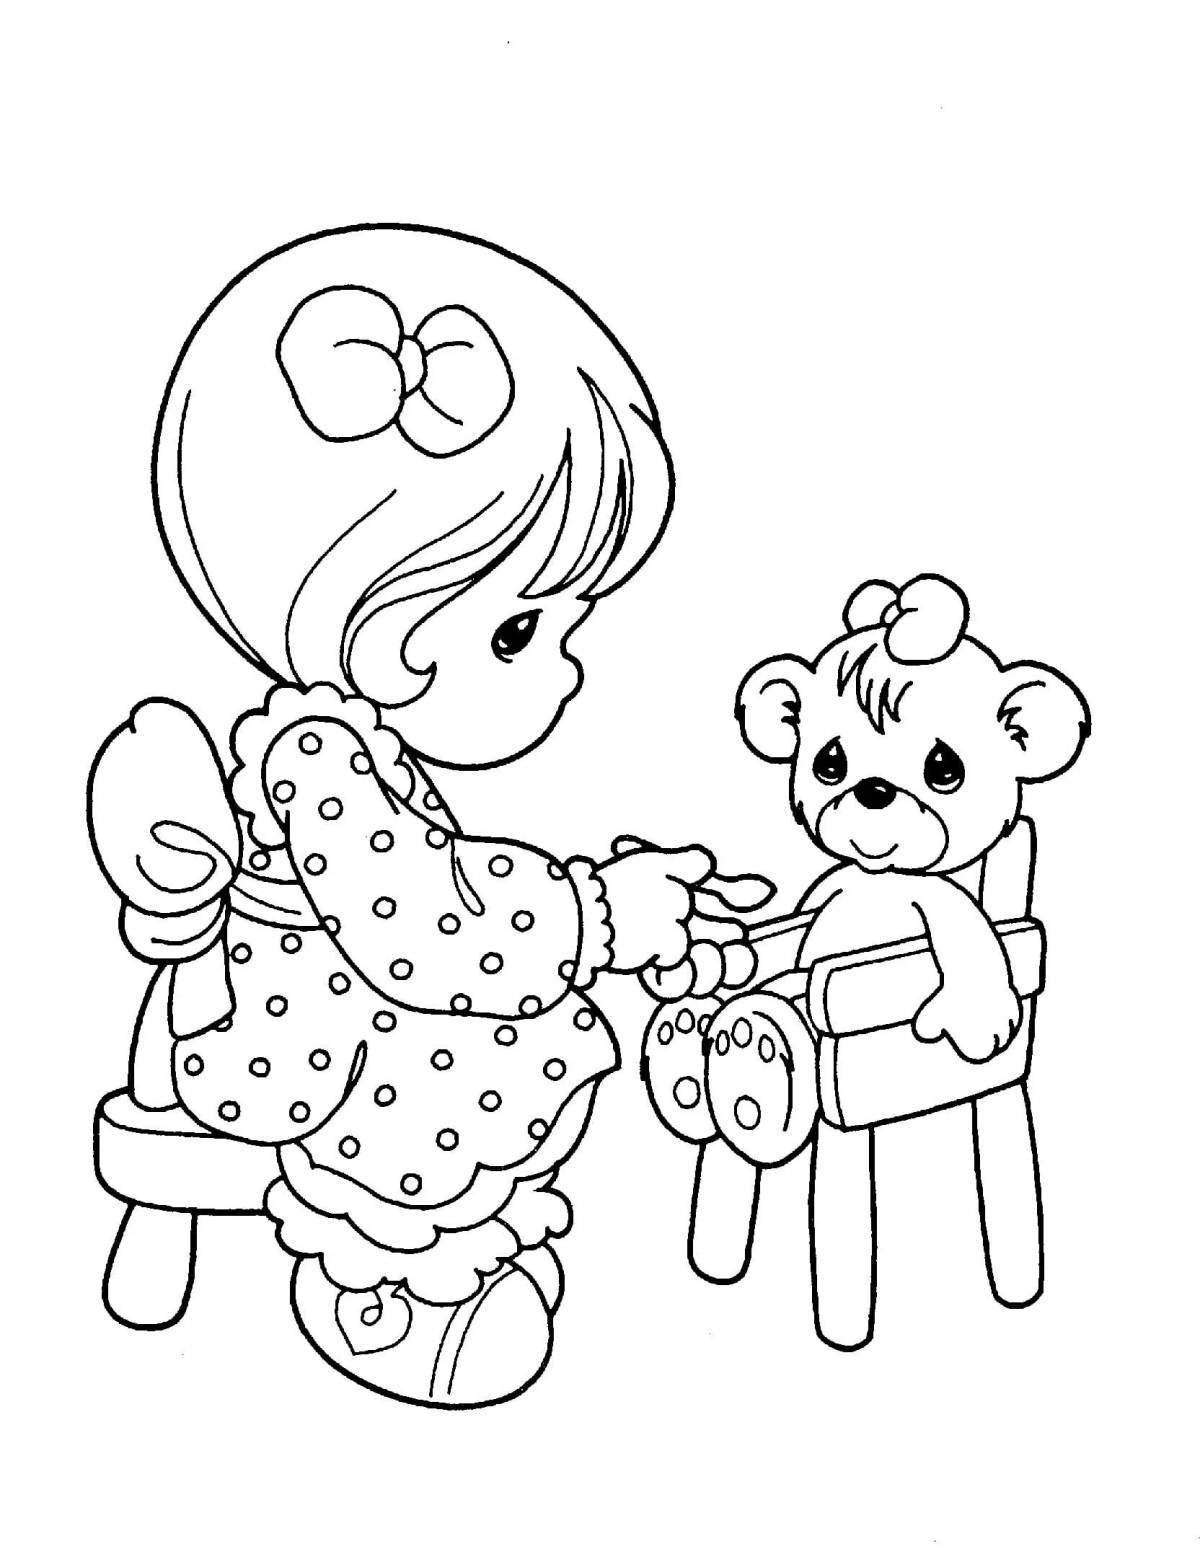 Fun coloring pages for dolls